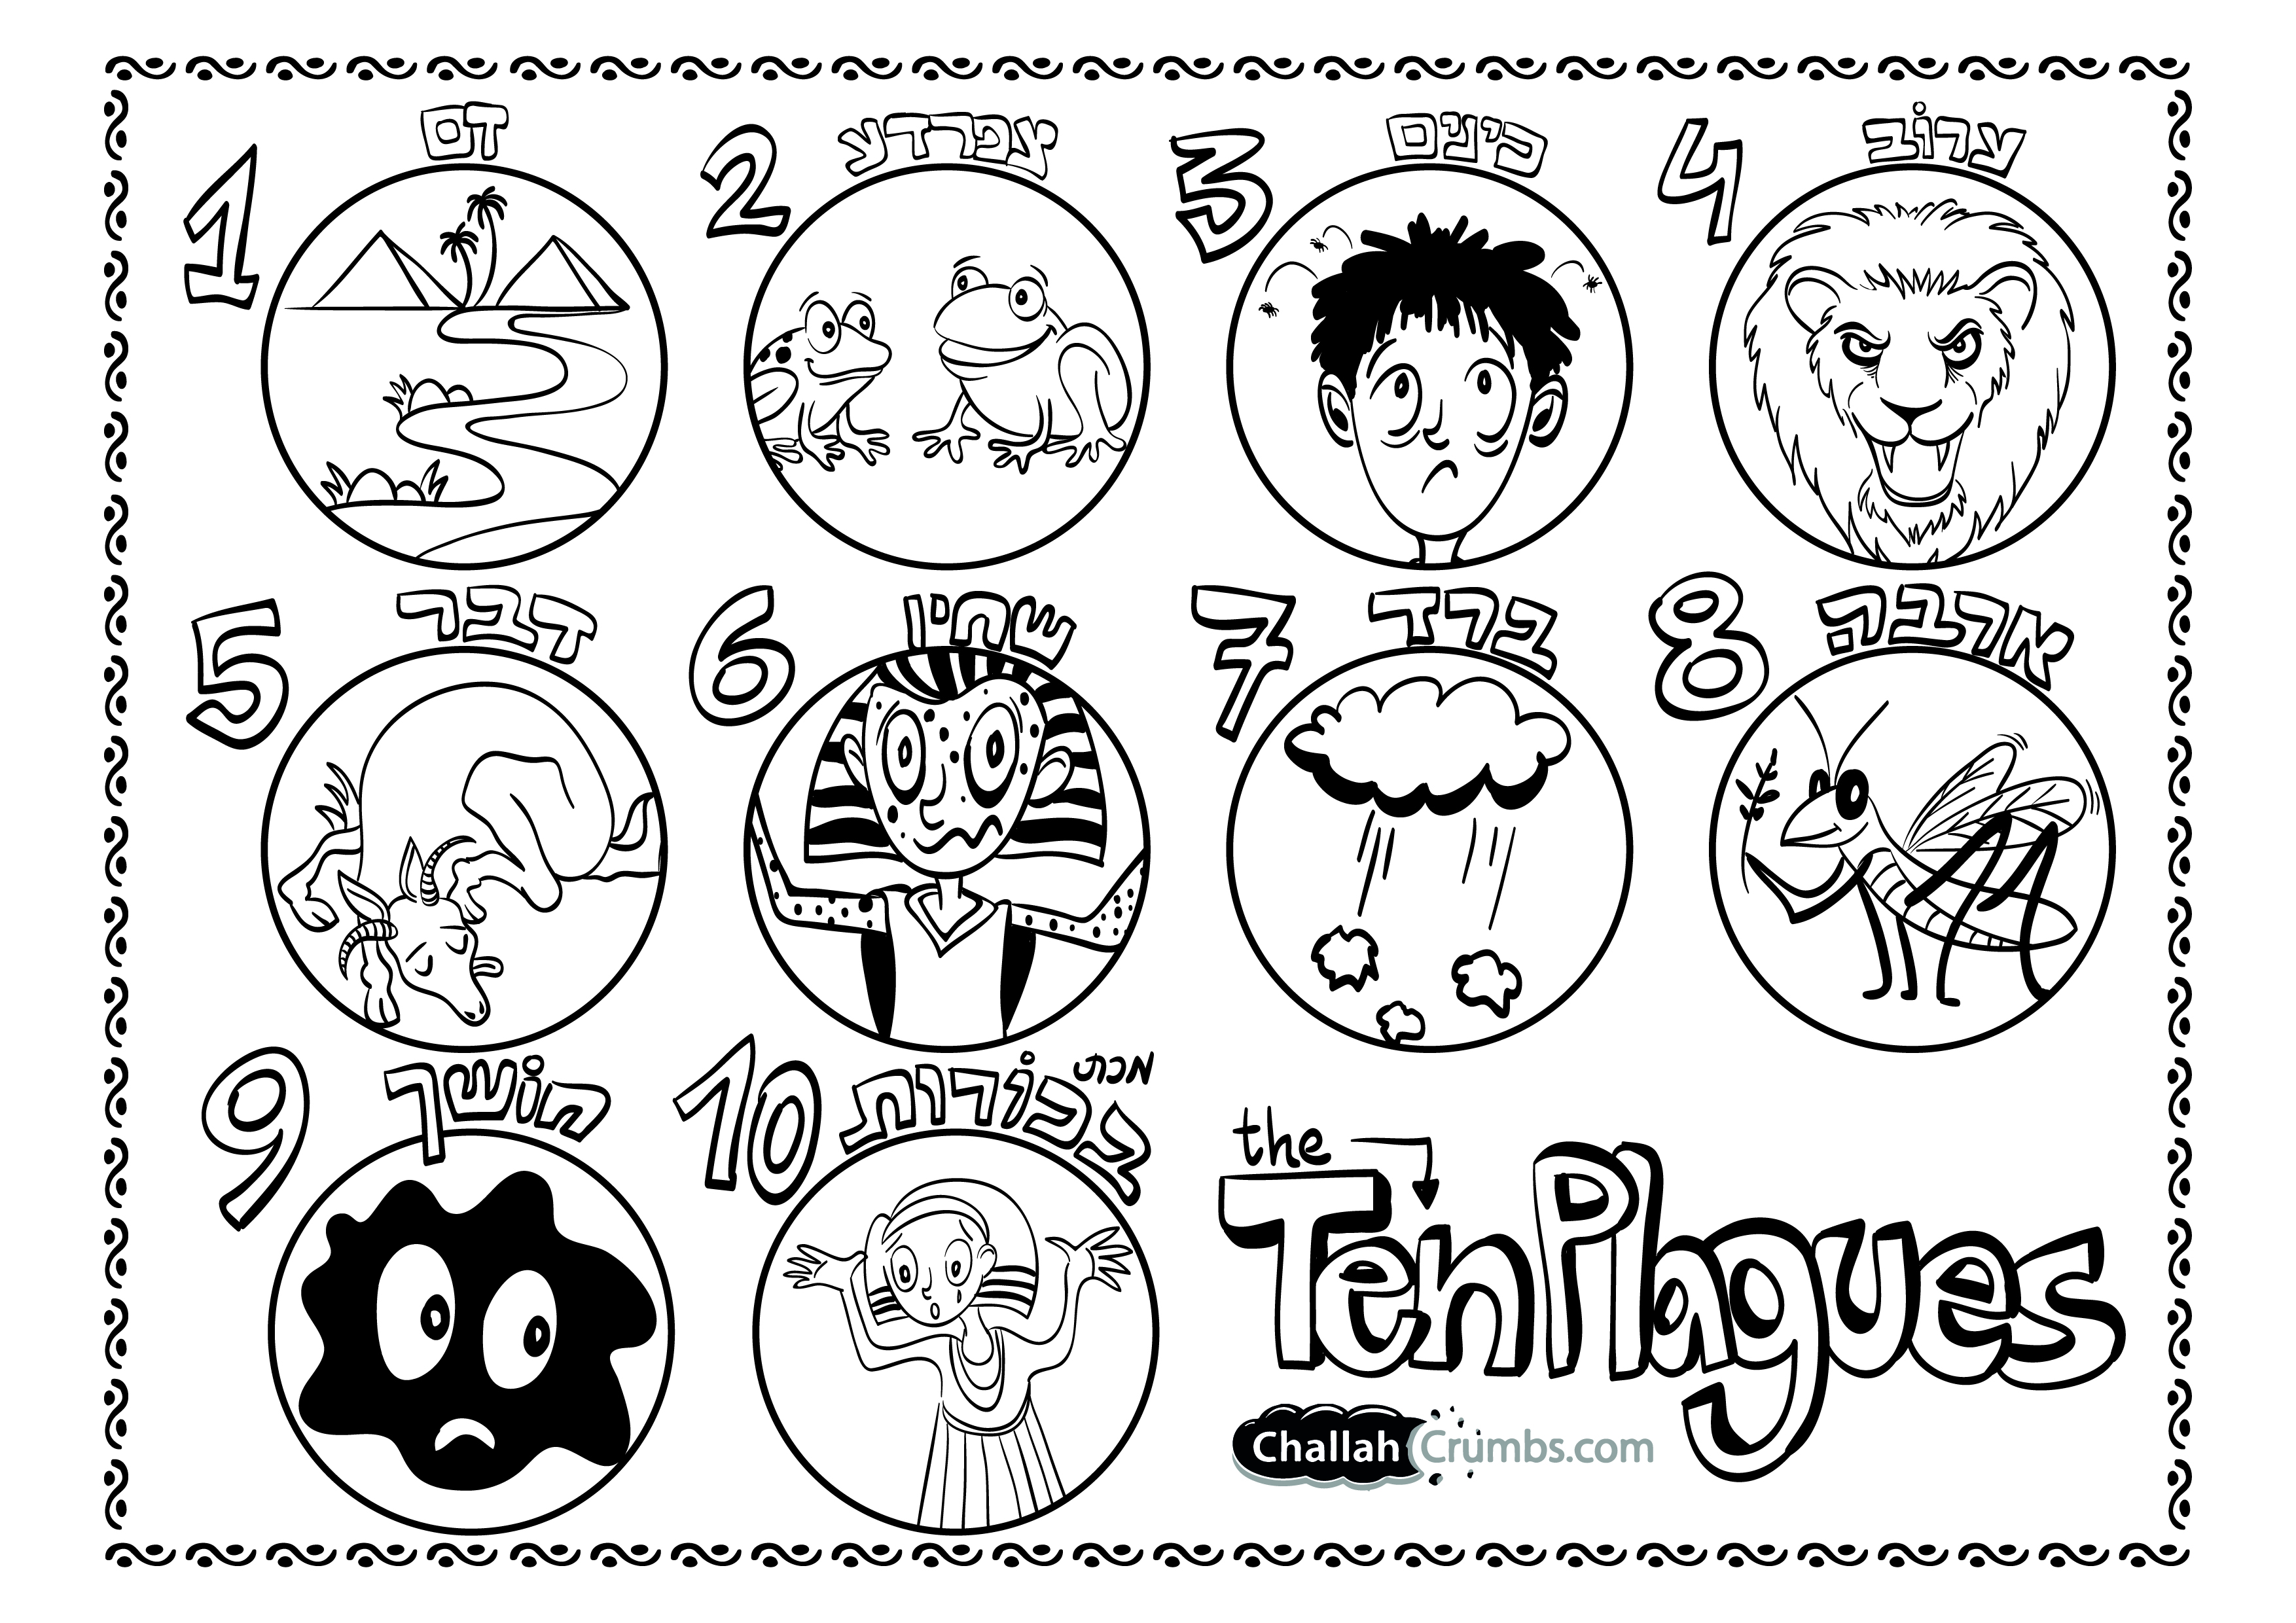 10 plagues coloring pages for preschool